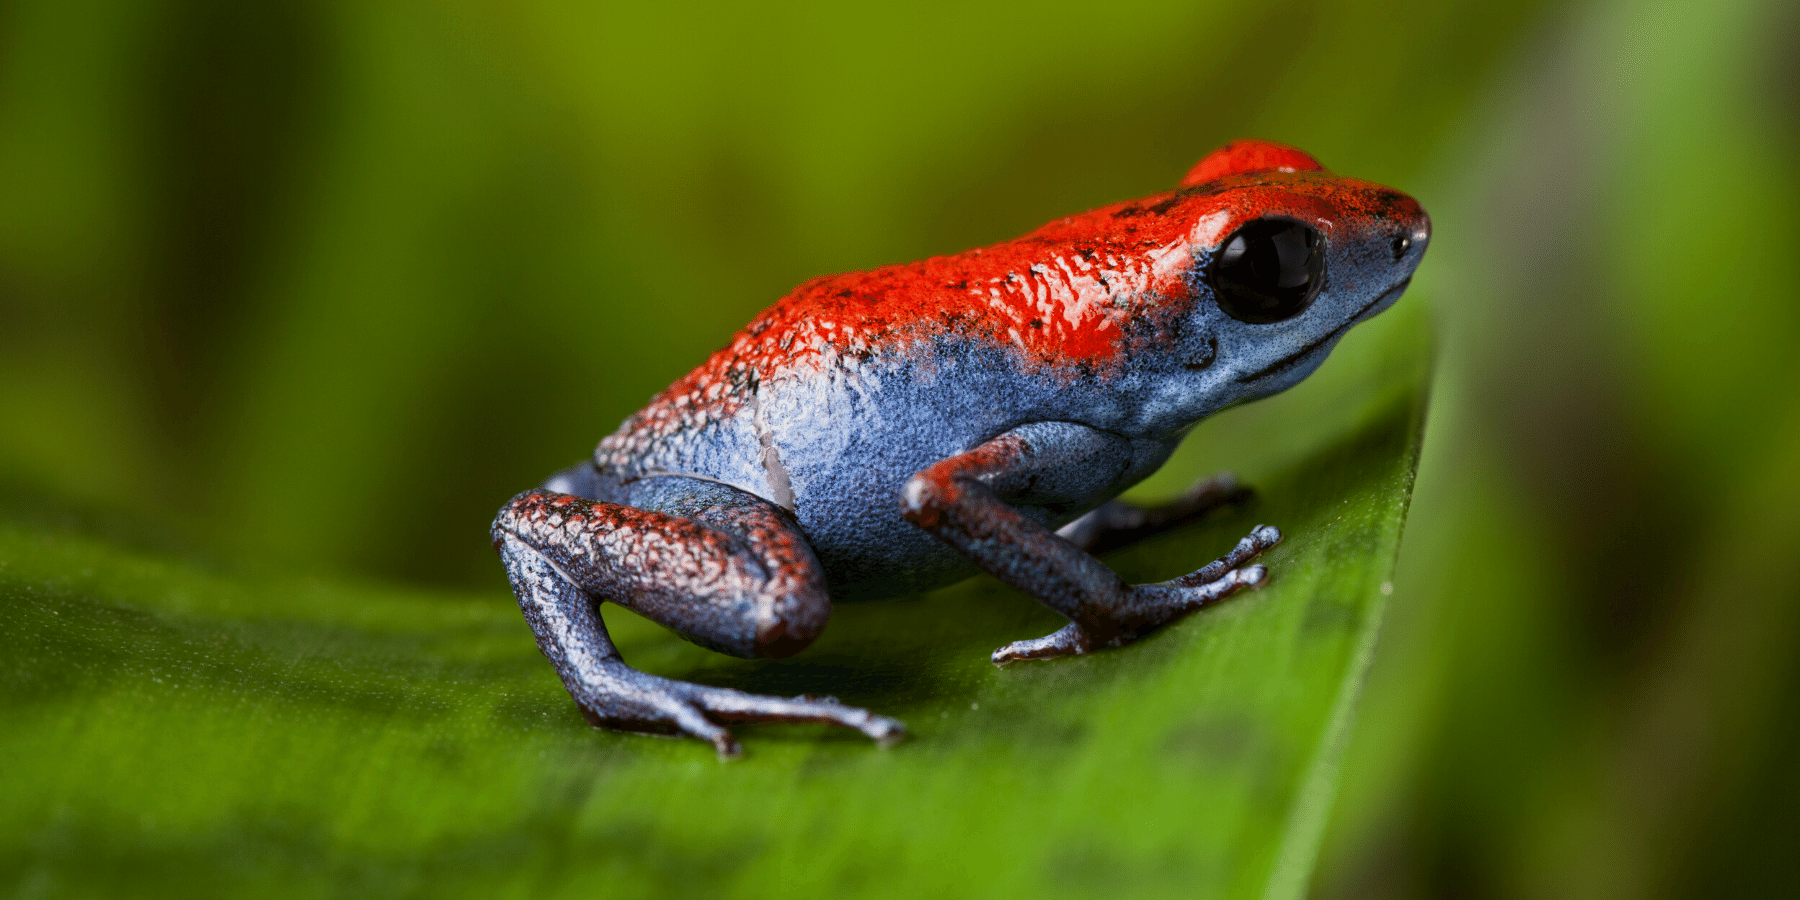 A frog with a brilliant blue underbelly and legs with sticking red back and head , sits on a green leaf